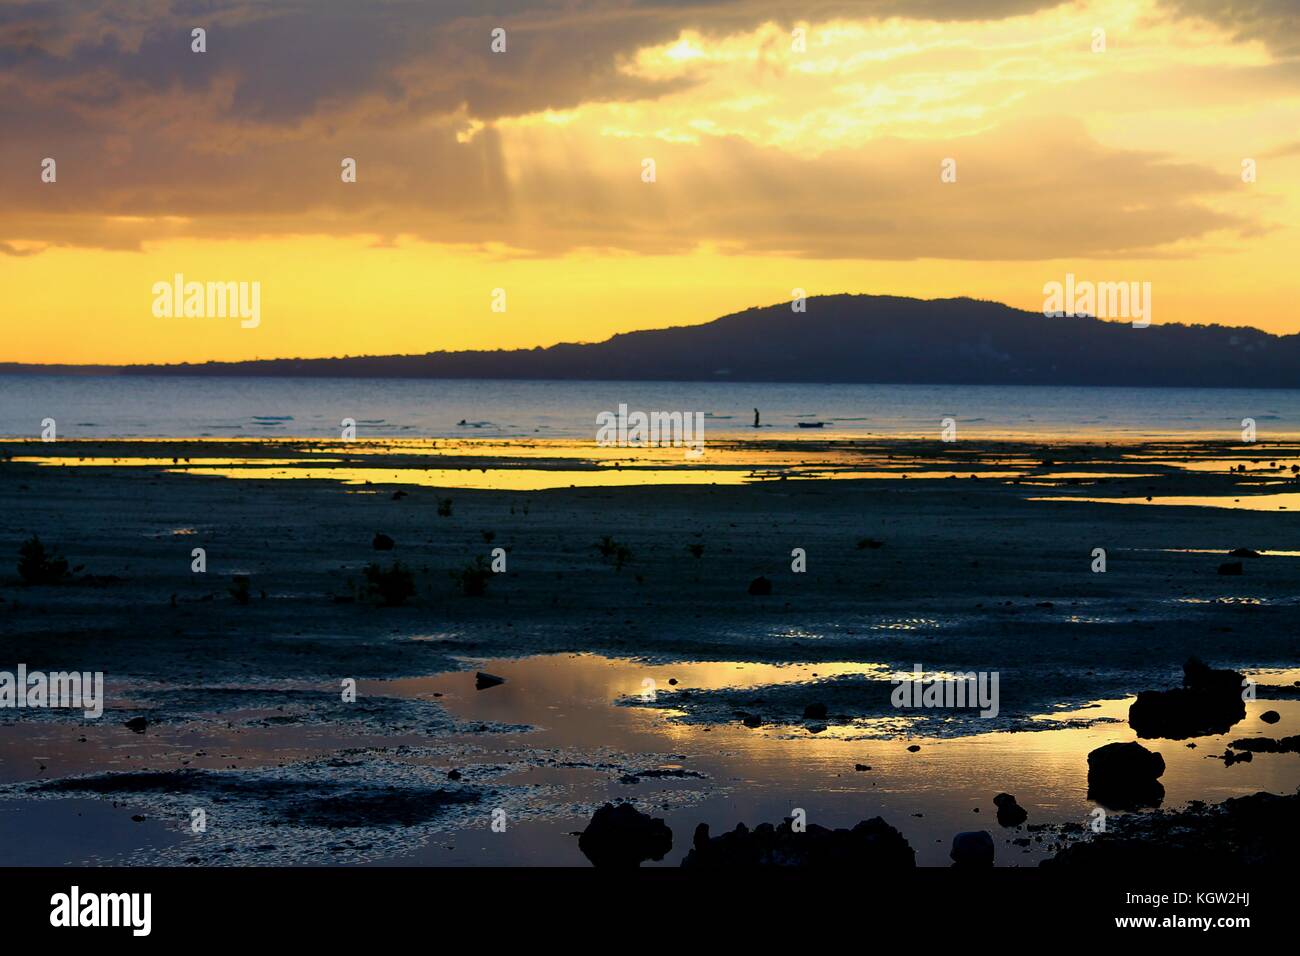 Ethereal view of the vast coastline during the sunset and low tide in Siquijor Island, Philippines Stock Photo